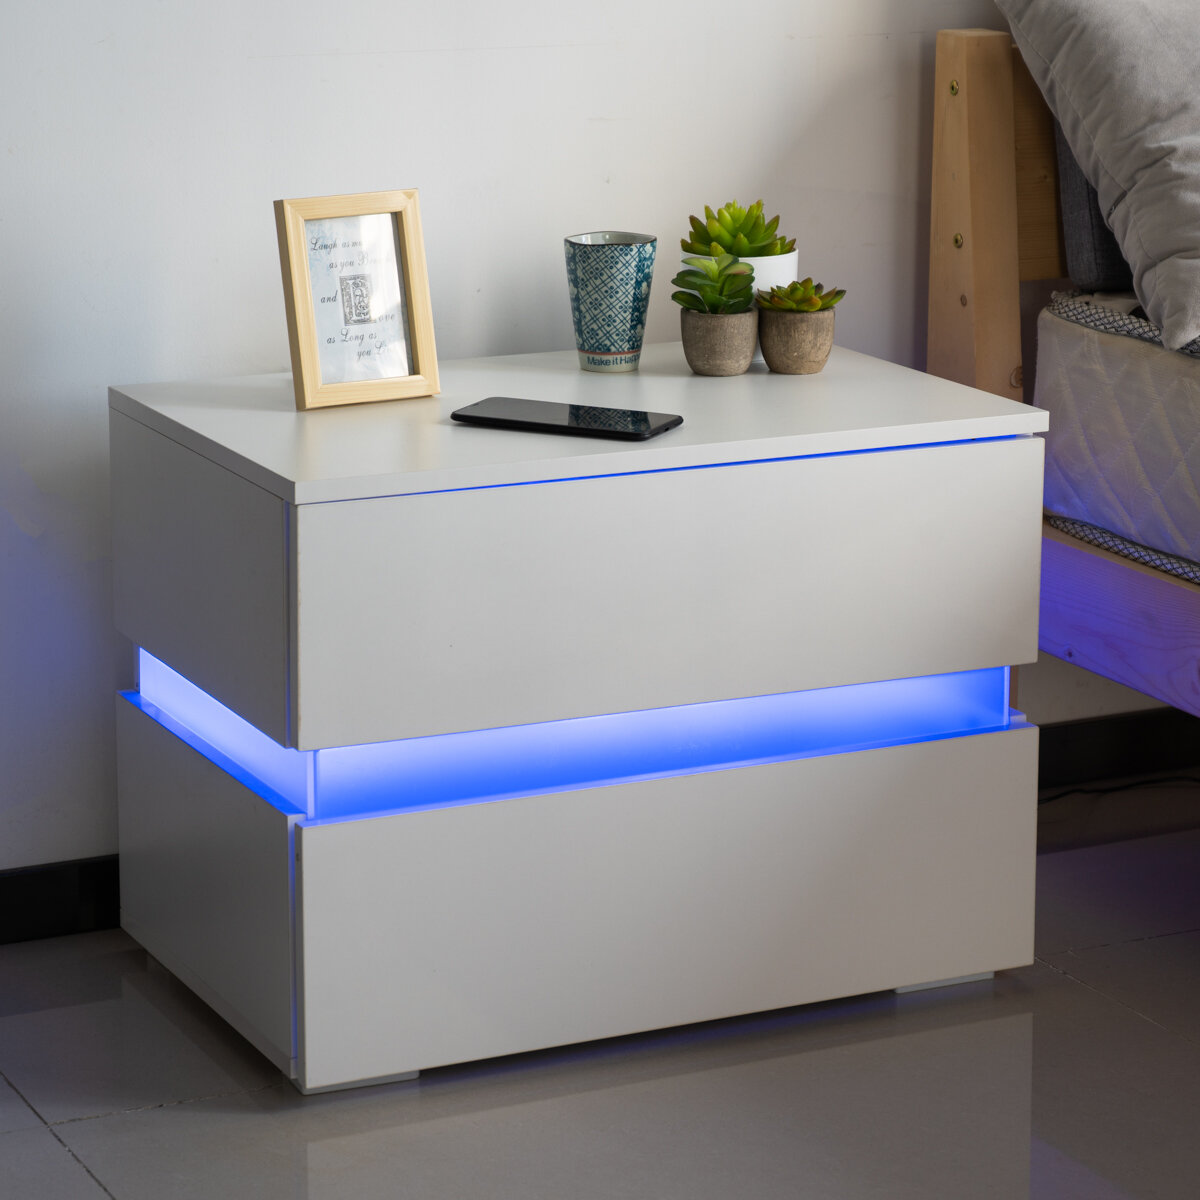 Image of Woodyhome 60*39*45cm High Gloss LED Light Nightstands w/2 Drawers Modern Bedside File Cabinet Holder Chest Table for Hom